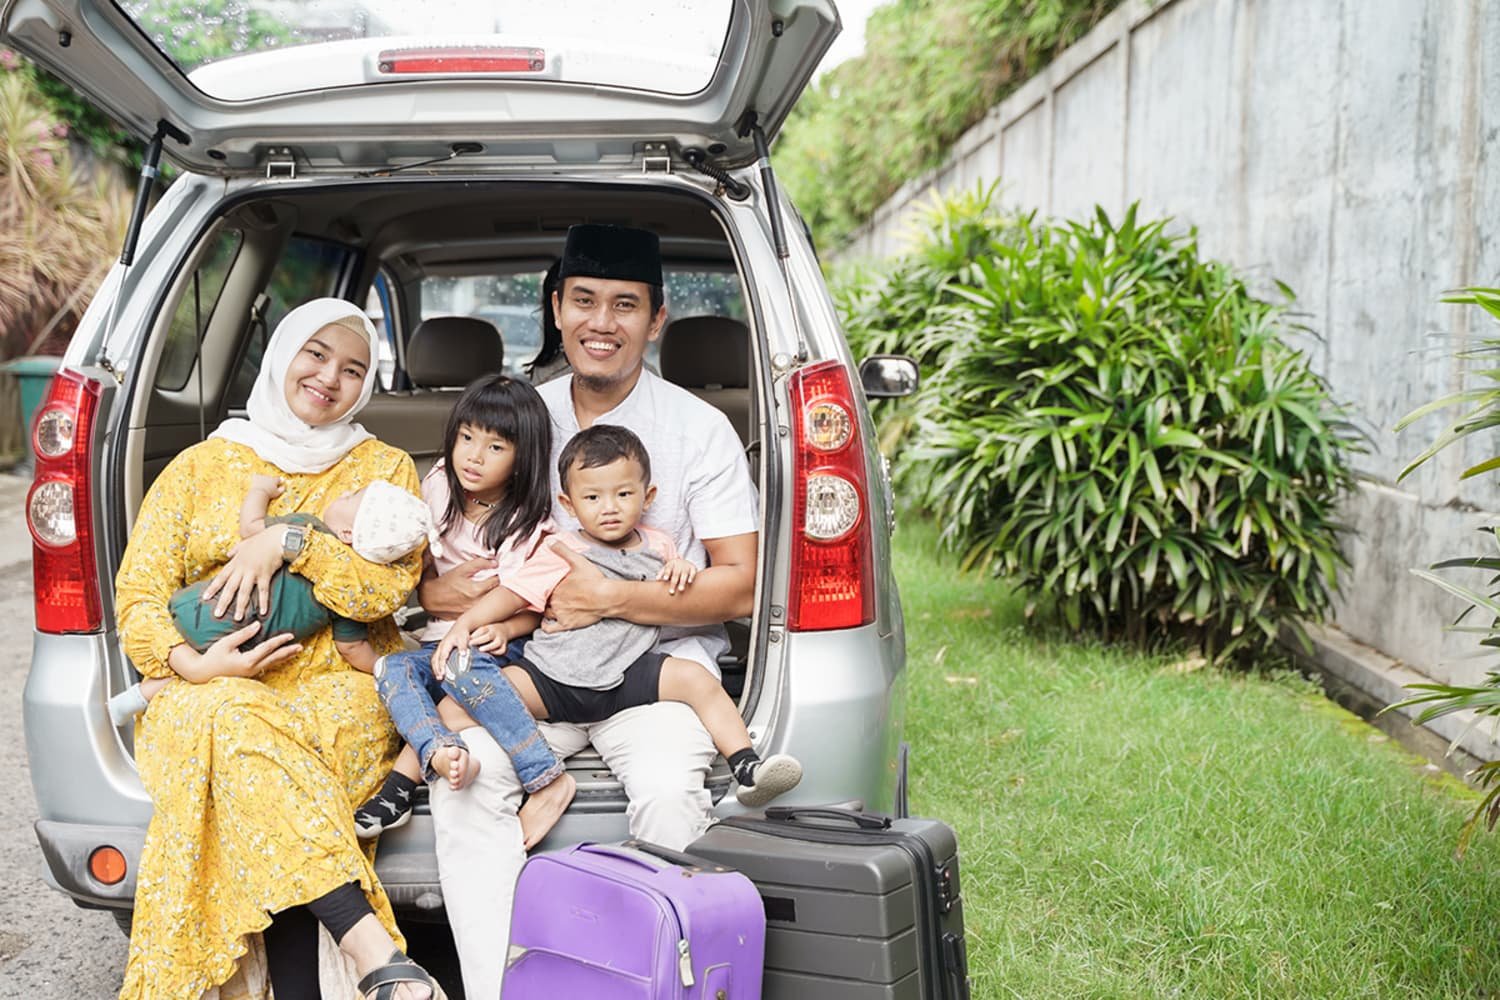 Is the Family Car a Disaster? Try These Tips Before Your Next Road Trip.